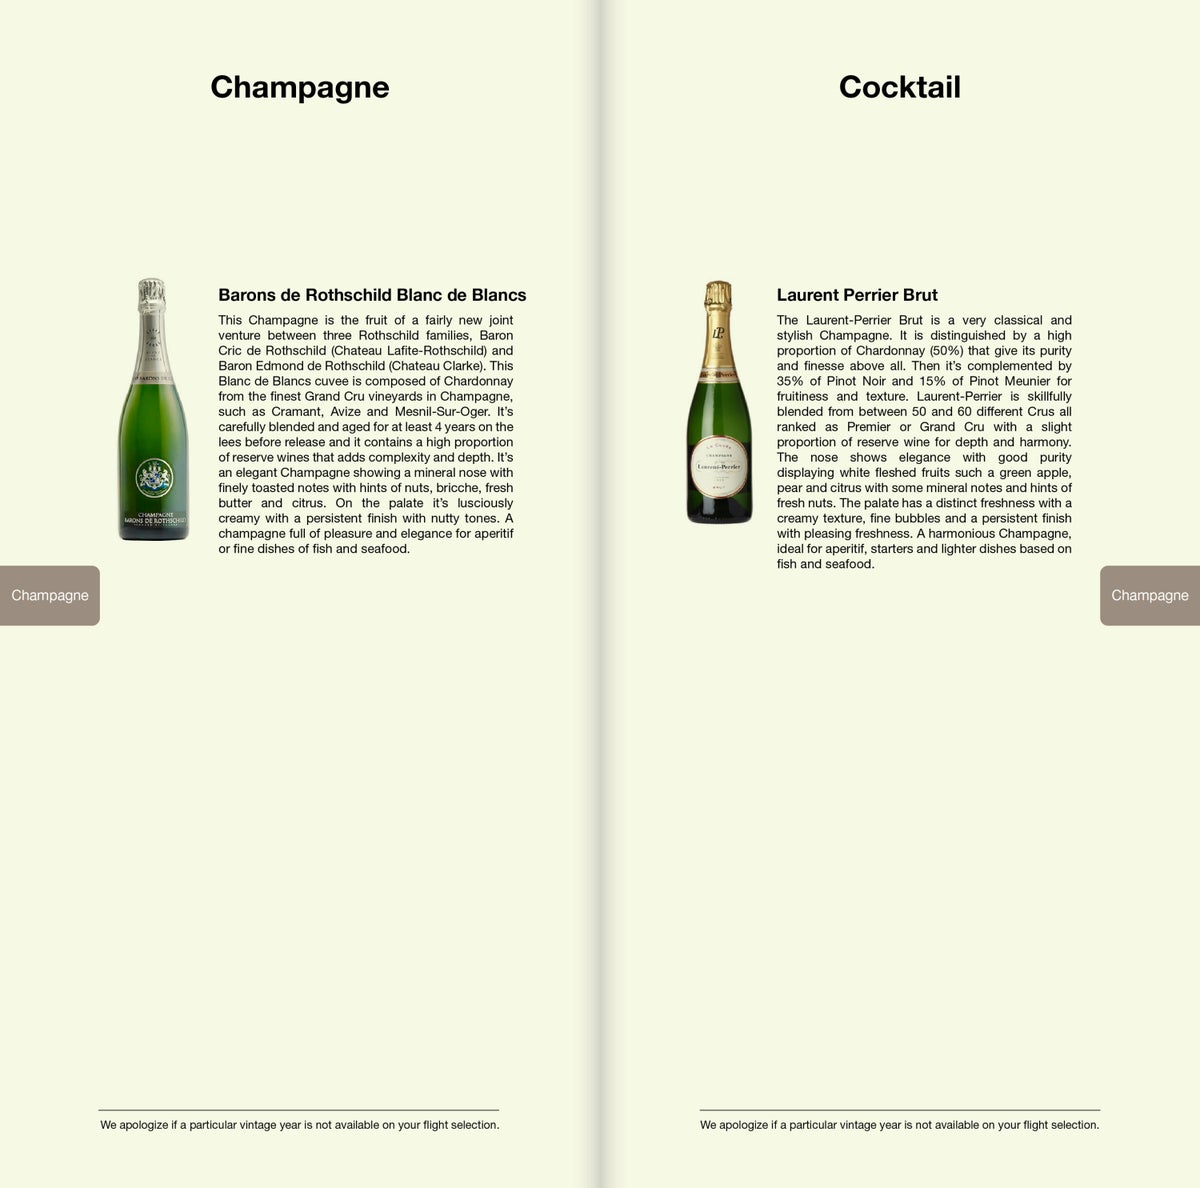 Asiana Airlines A380 First Class Champagne List - Cherag Dubash